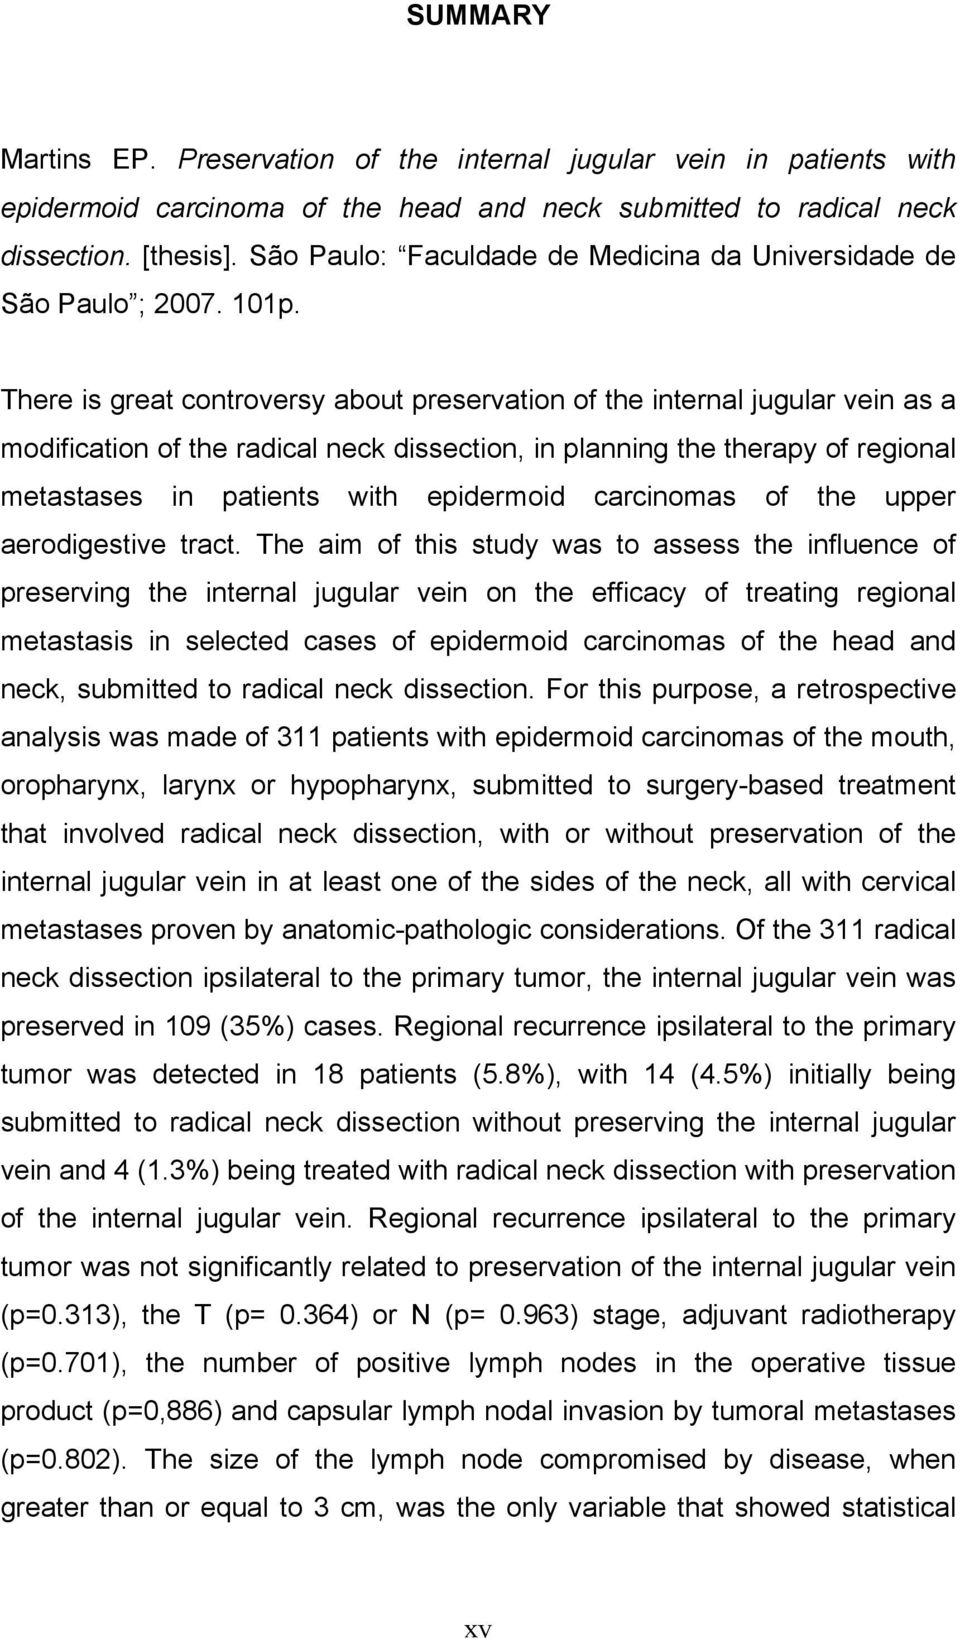 There is great controversy about preservation of the internal jugular vein as a modification of the radical neck dissection, in planning the therapy of regional metastases in patients with epidermoid